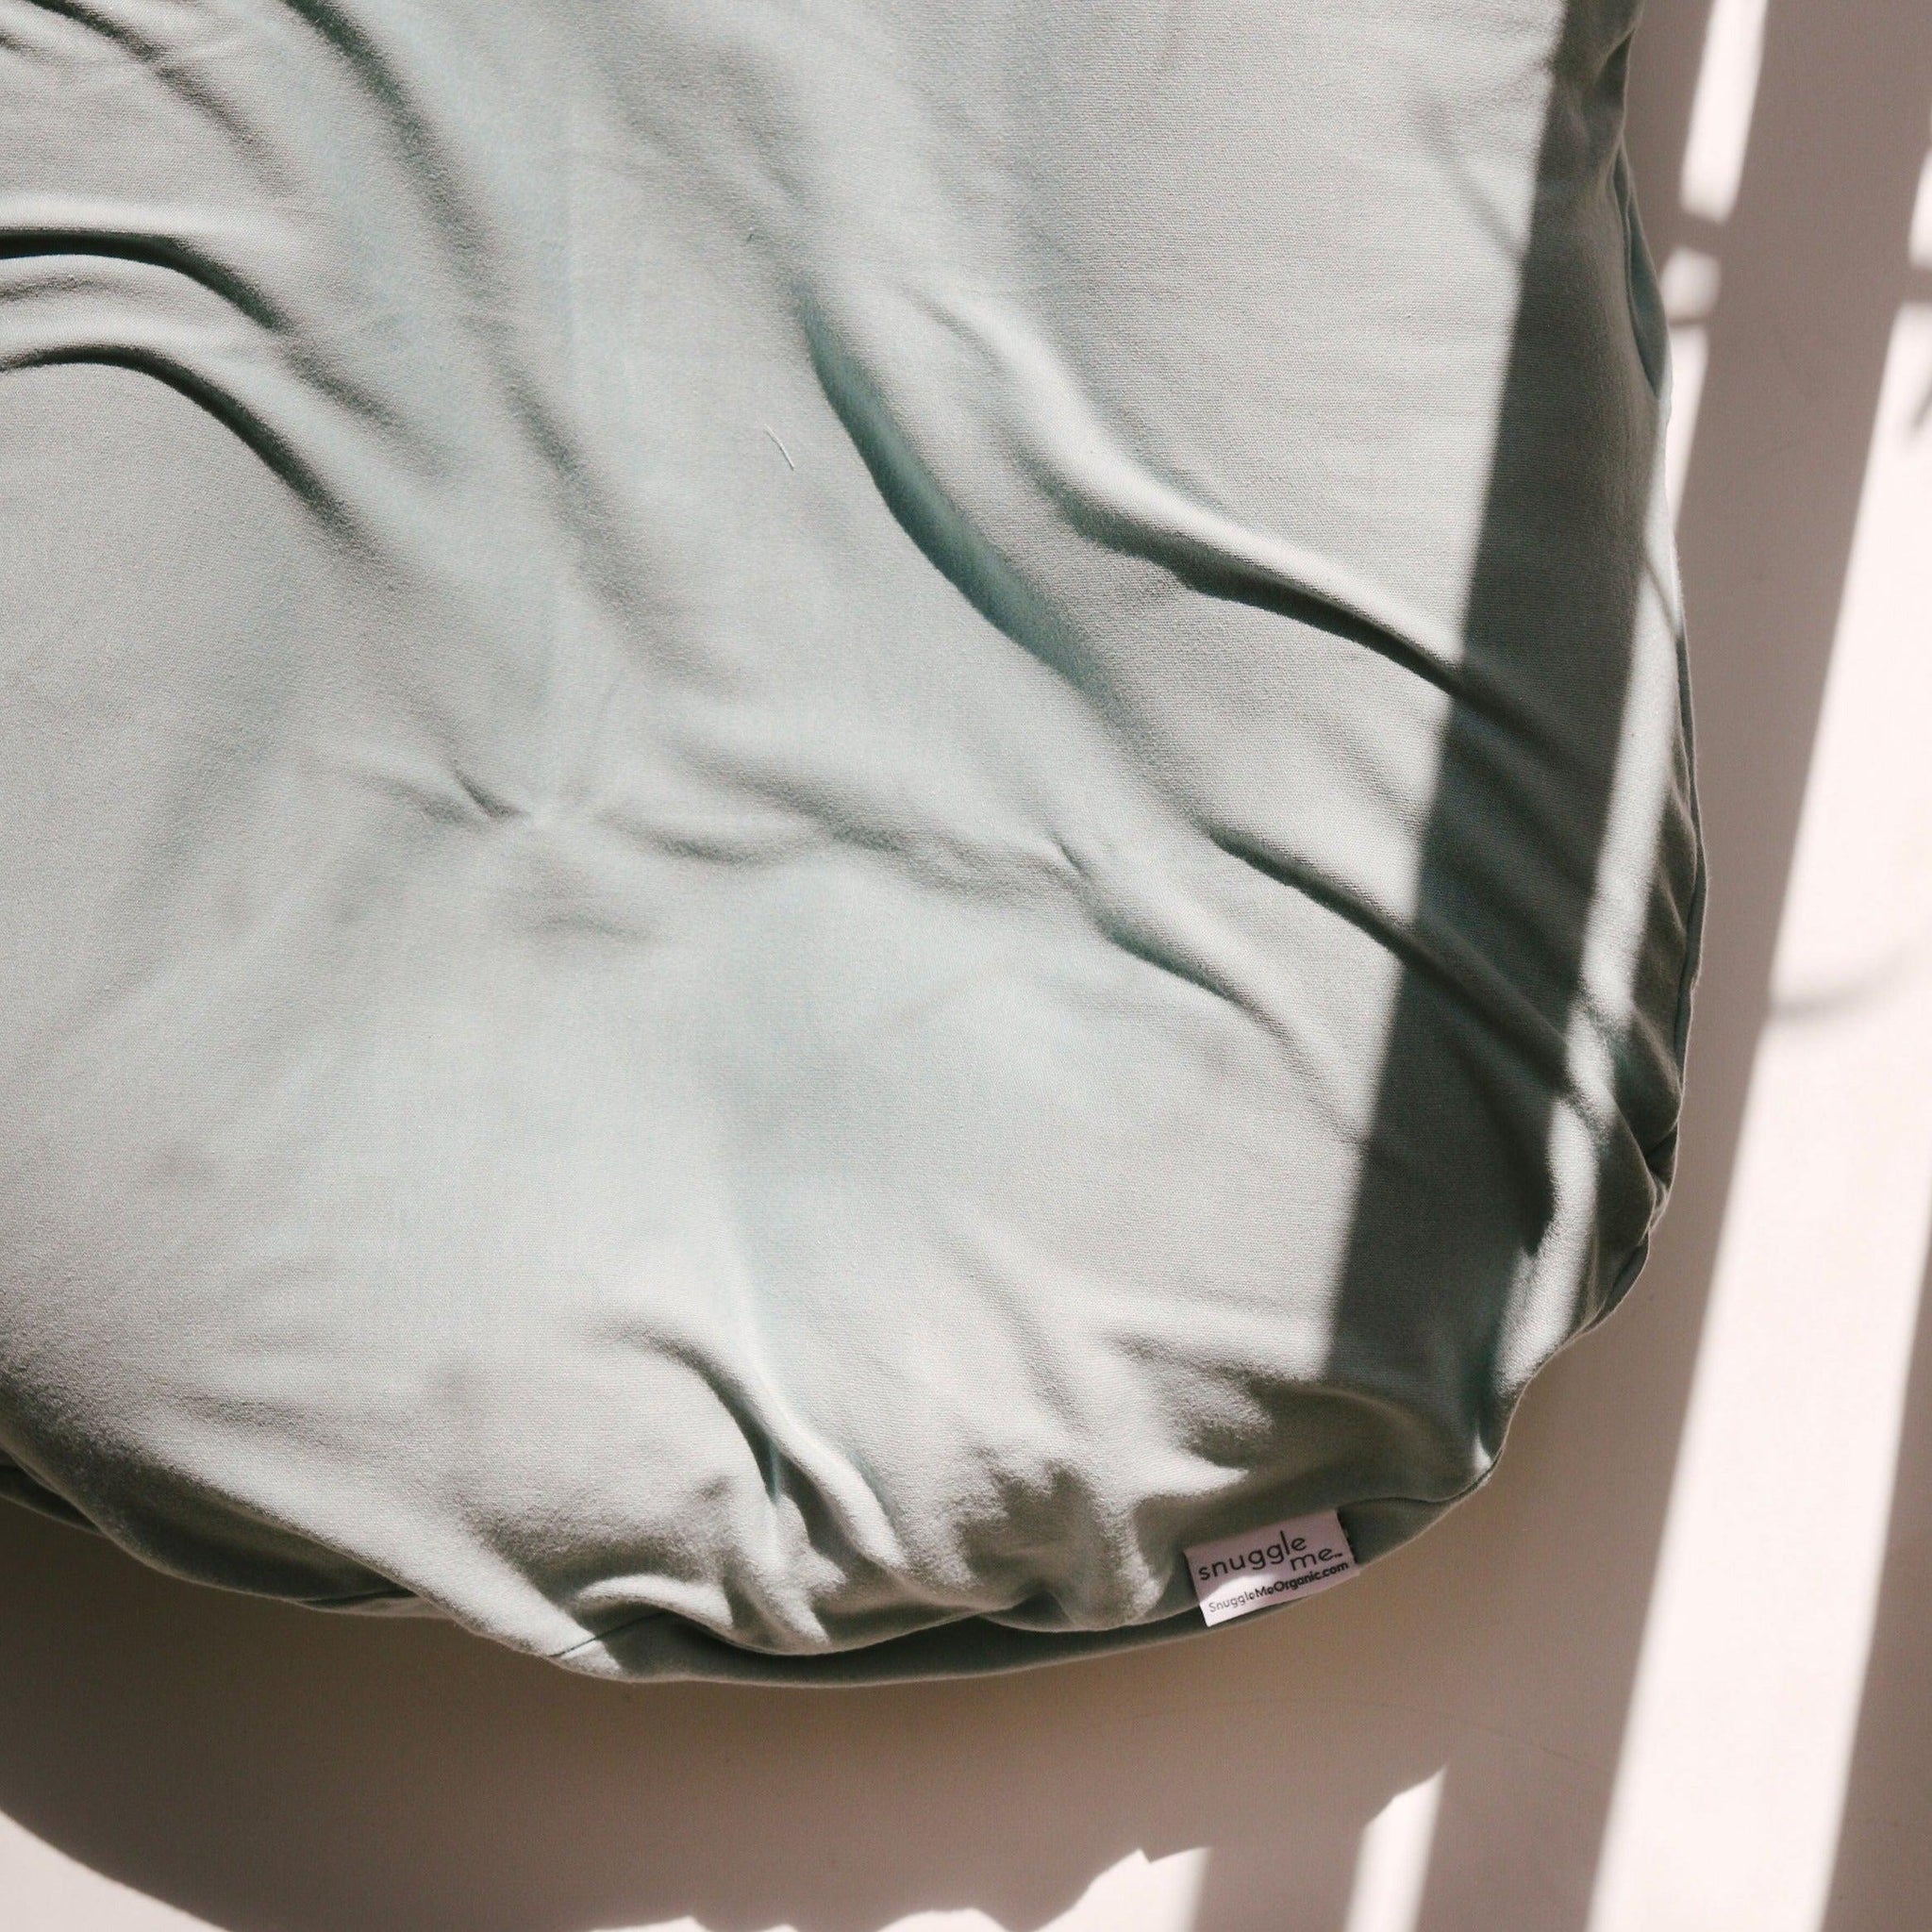 A close up image of The Snuggle Me® Lounger in a green shade.